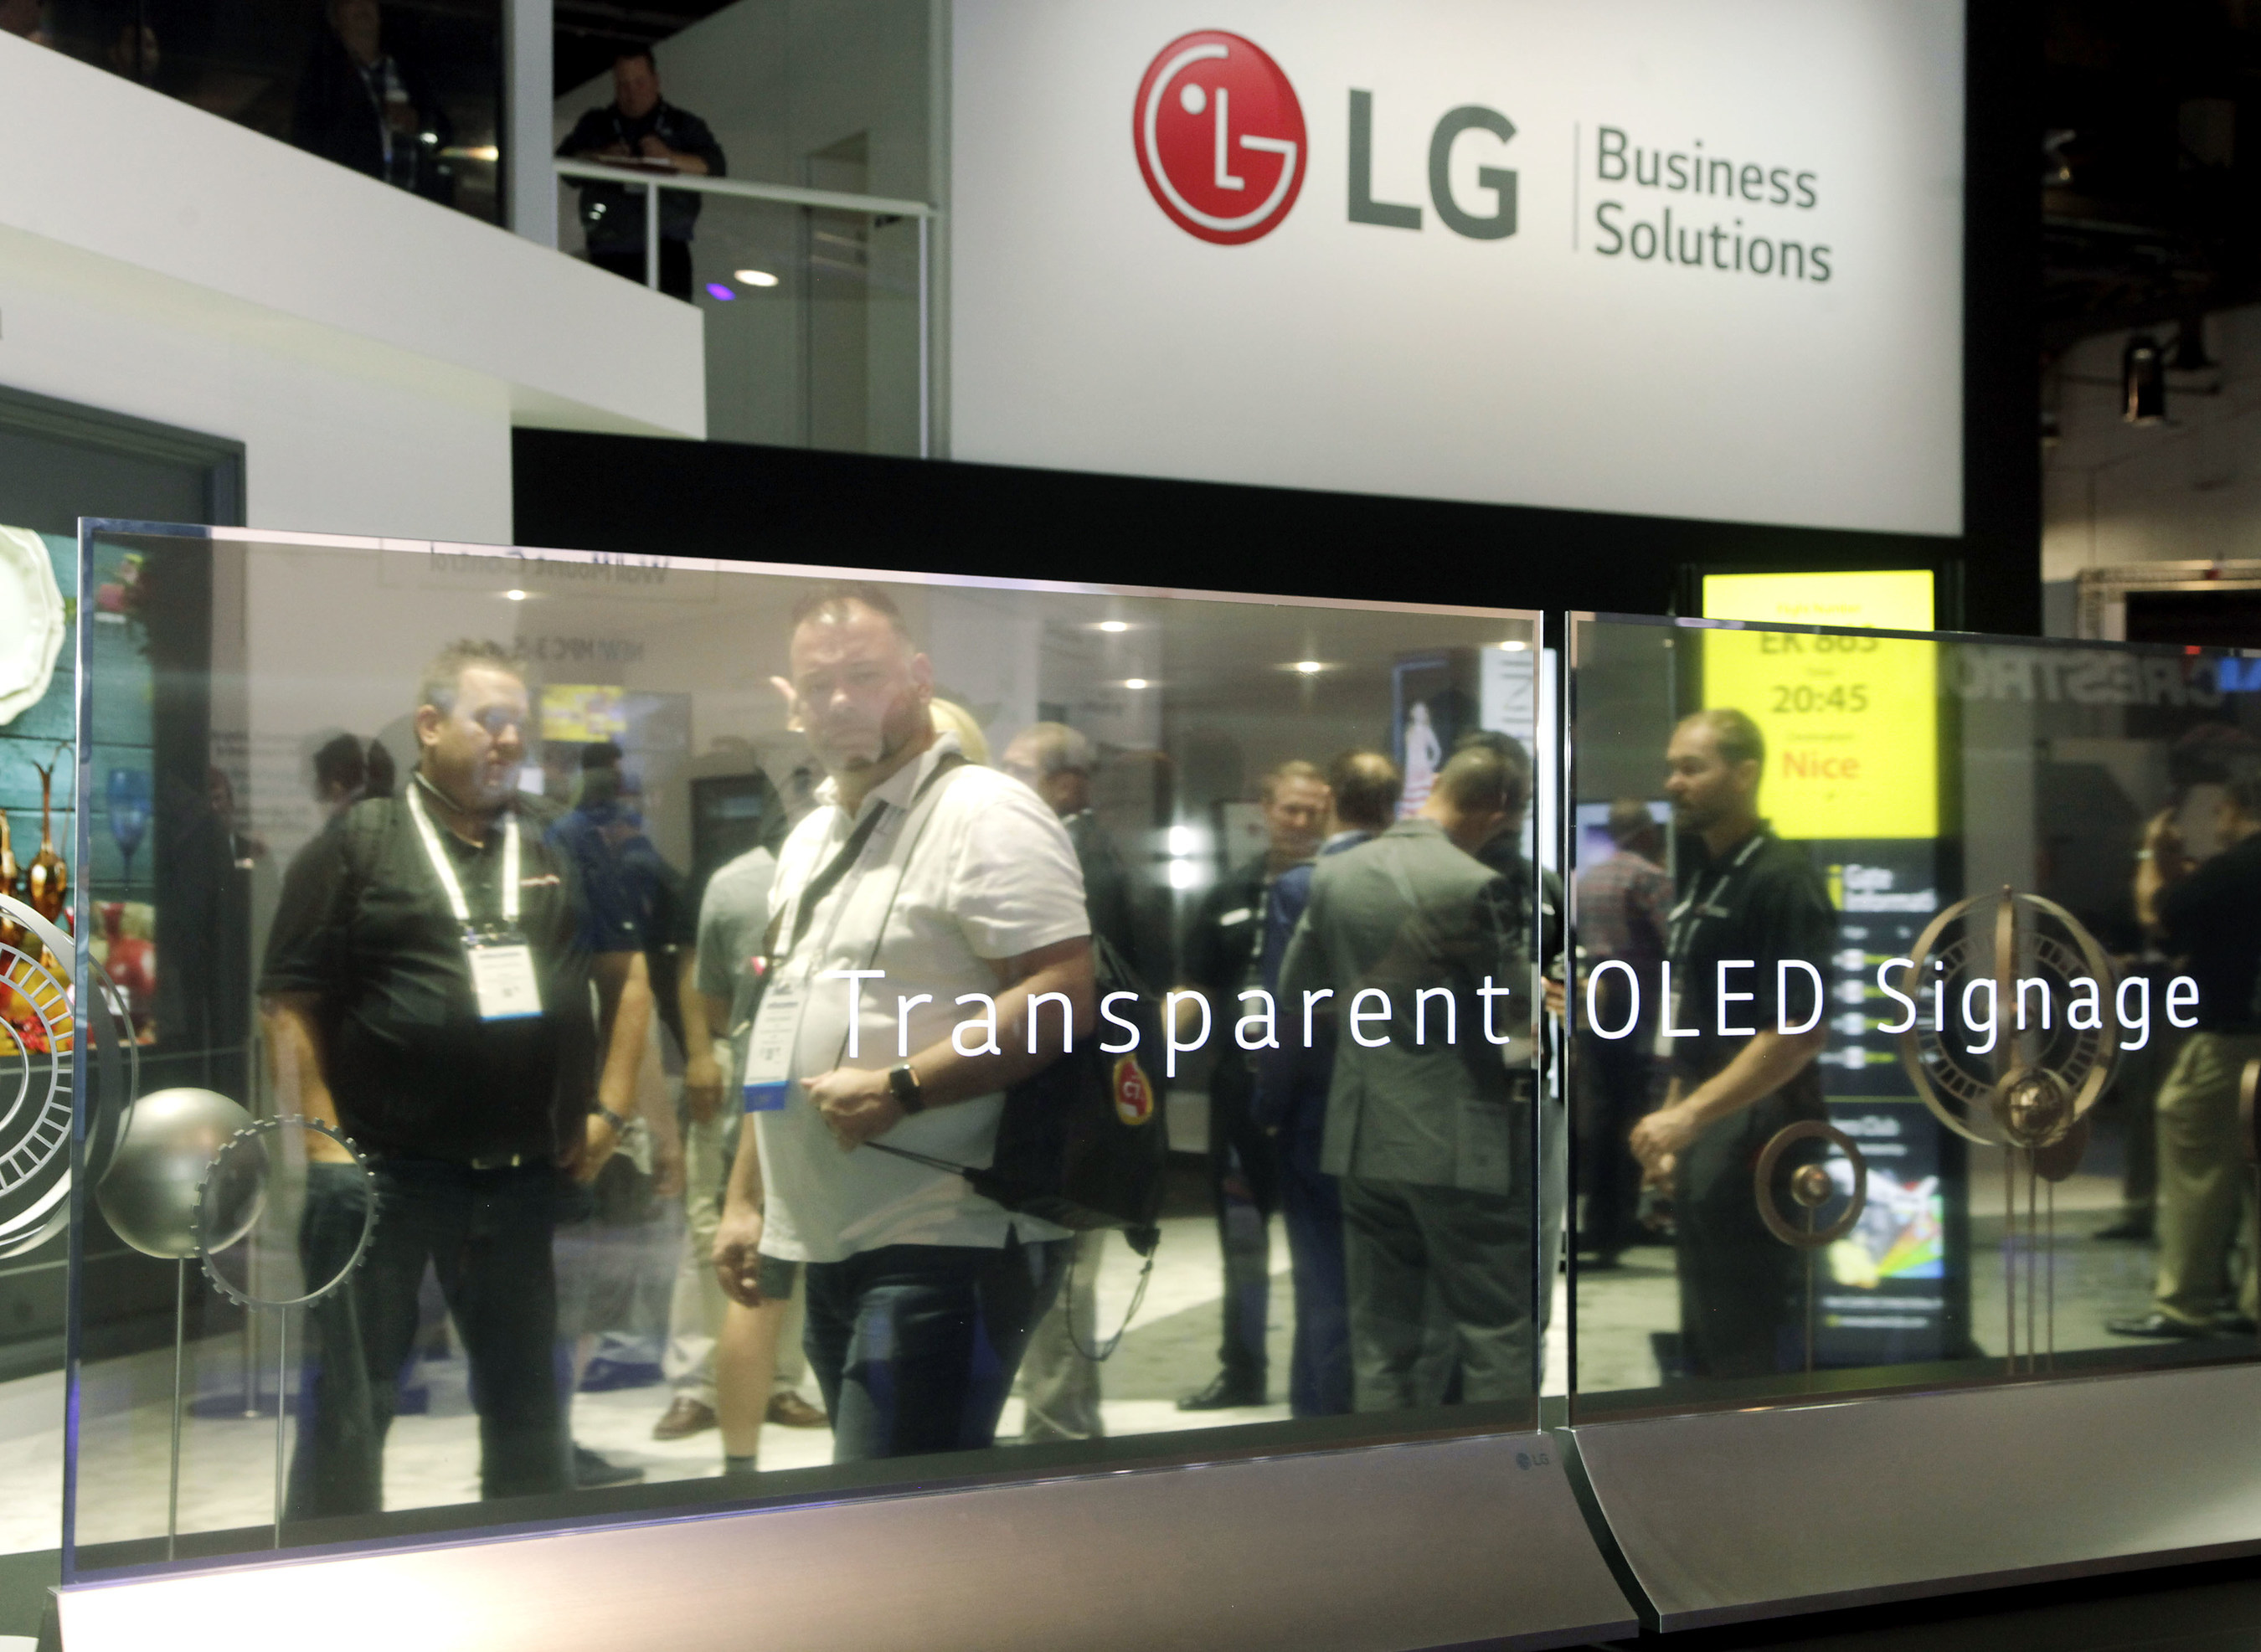 LG Launches Transparent OLED Commercial Display In U.S.